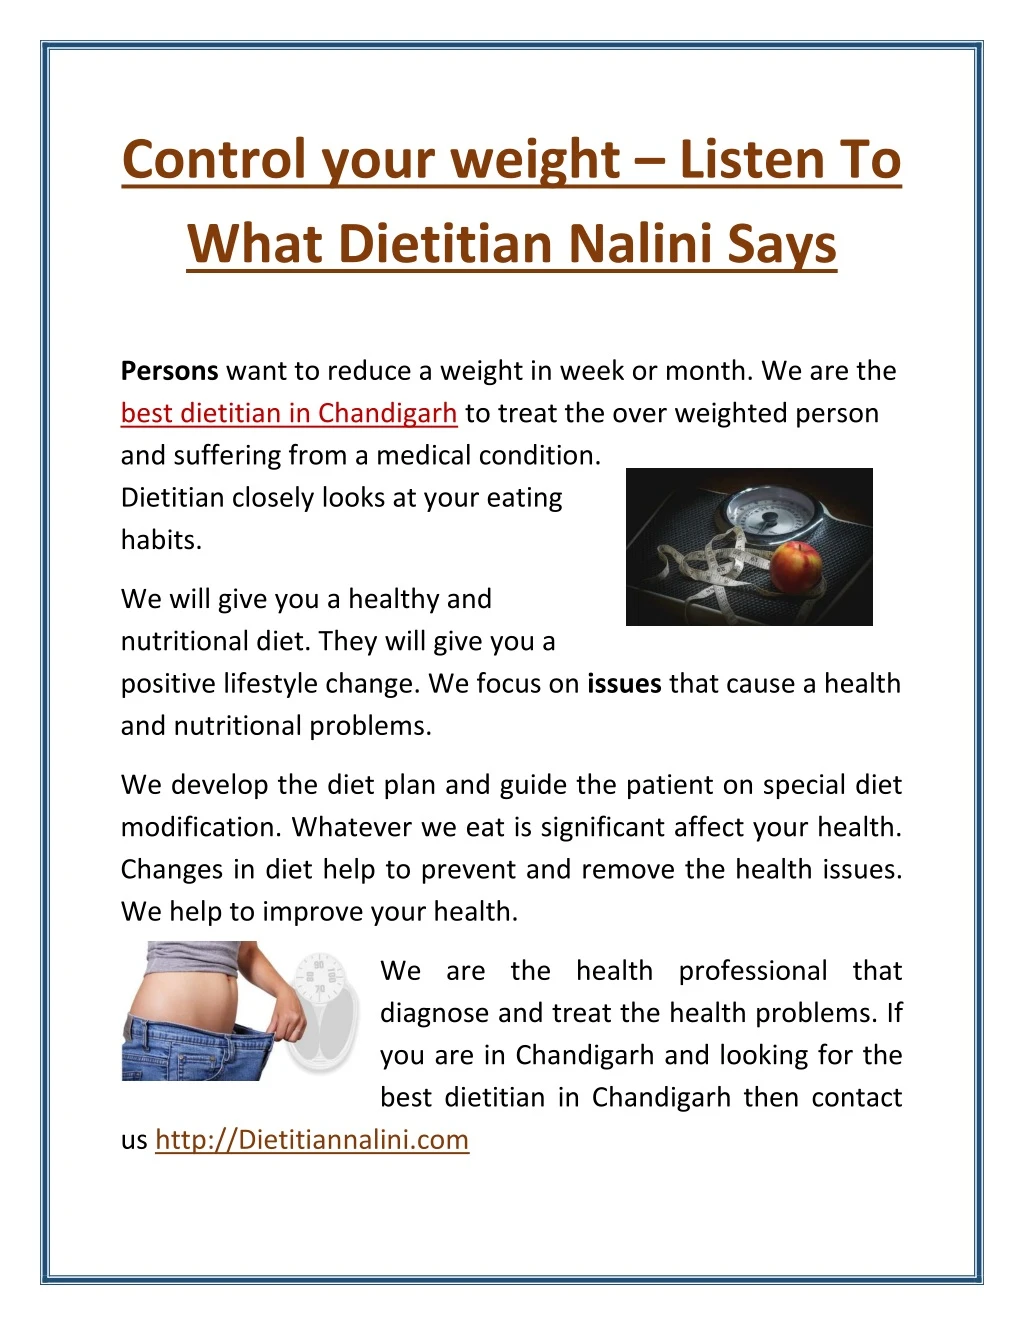 control your weight listen to what dietitian